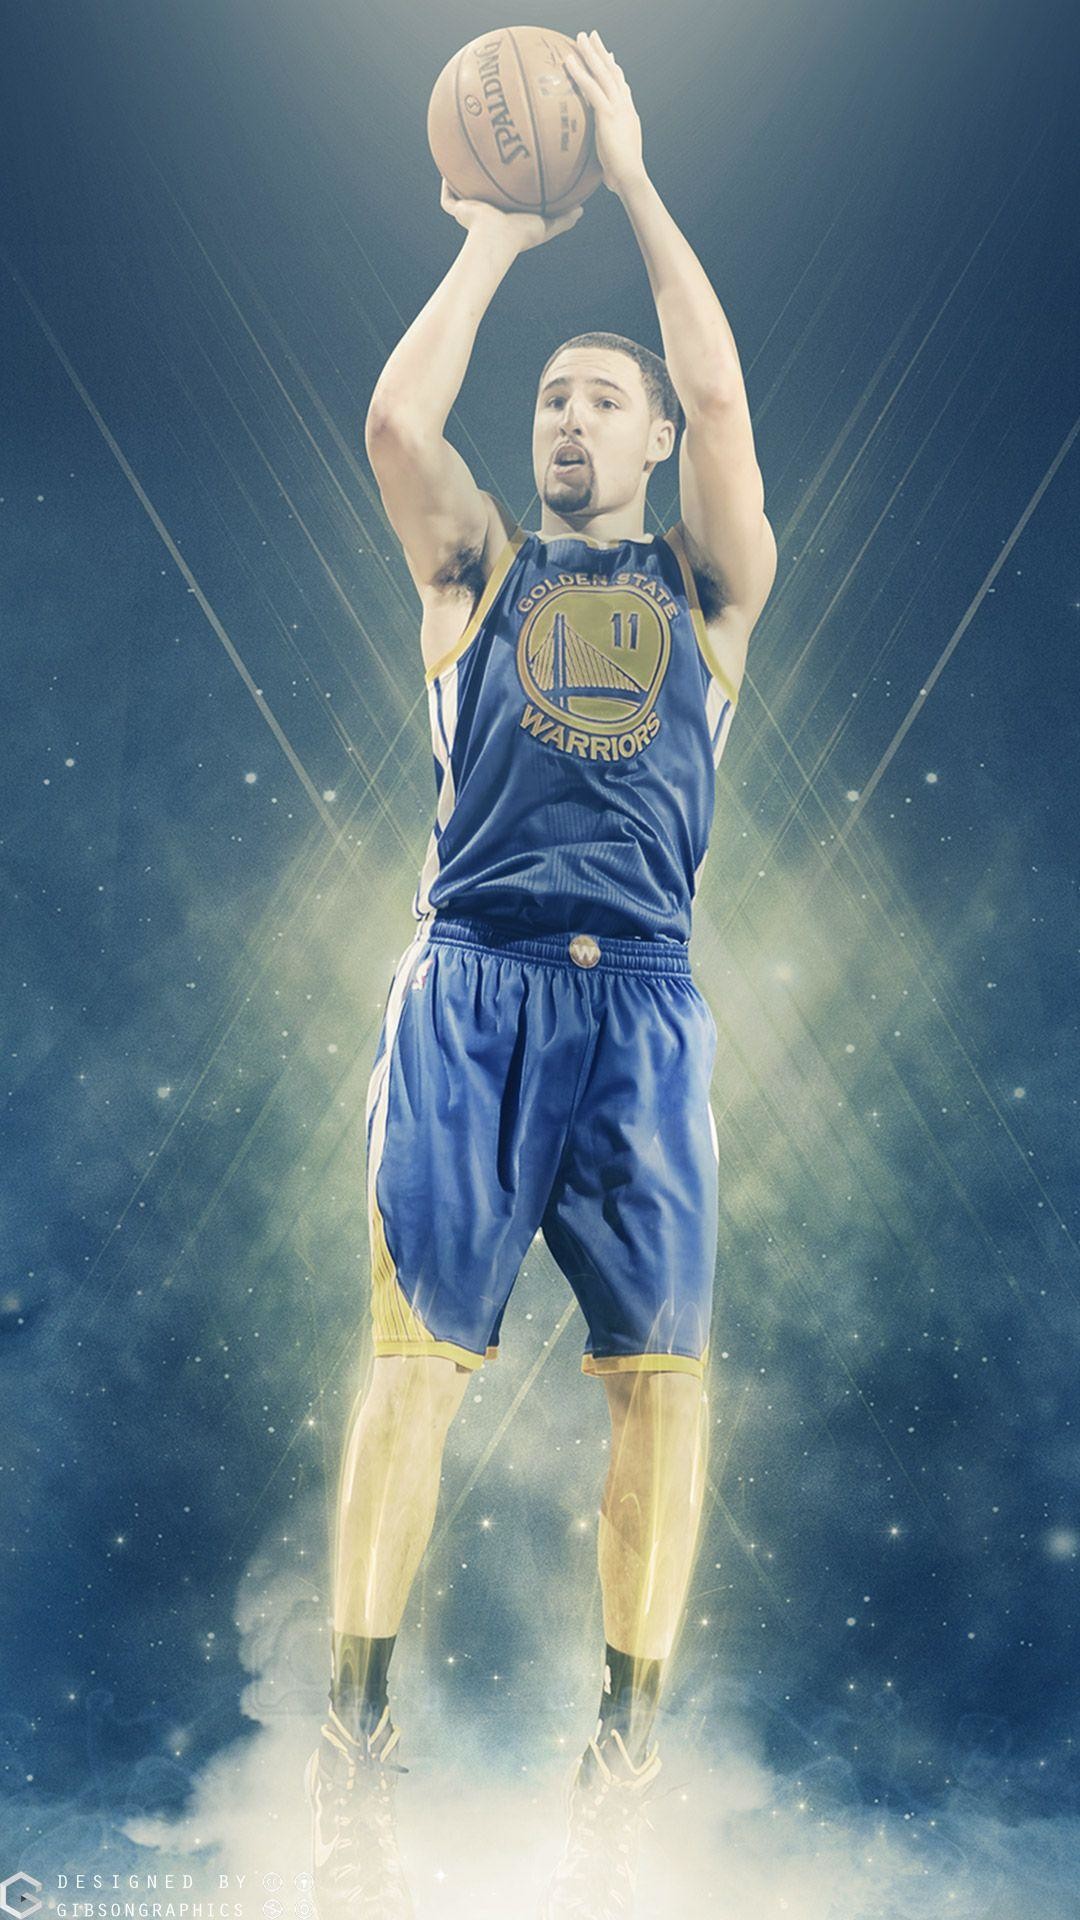 1080x1920 Klay Thompson Warriors Mobile Wallpaper | Basketball Wallpapers at .